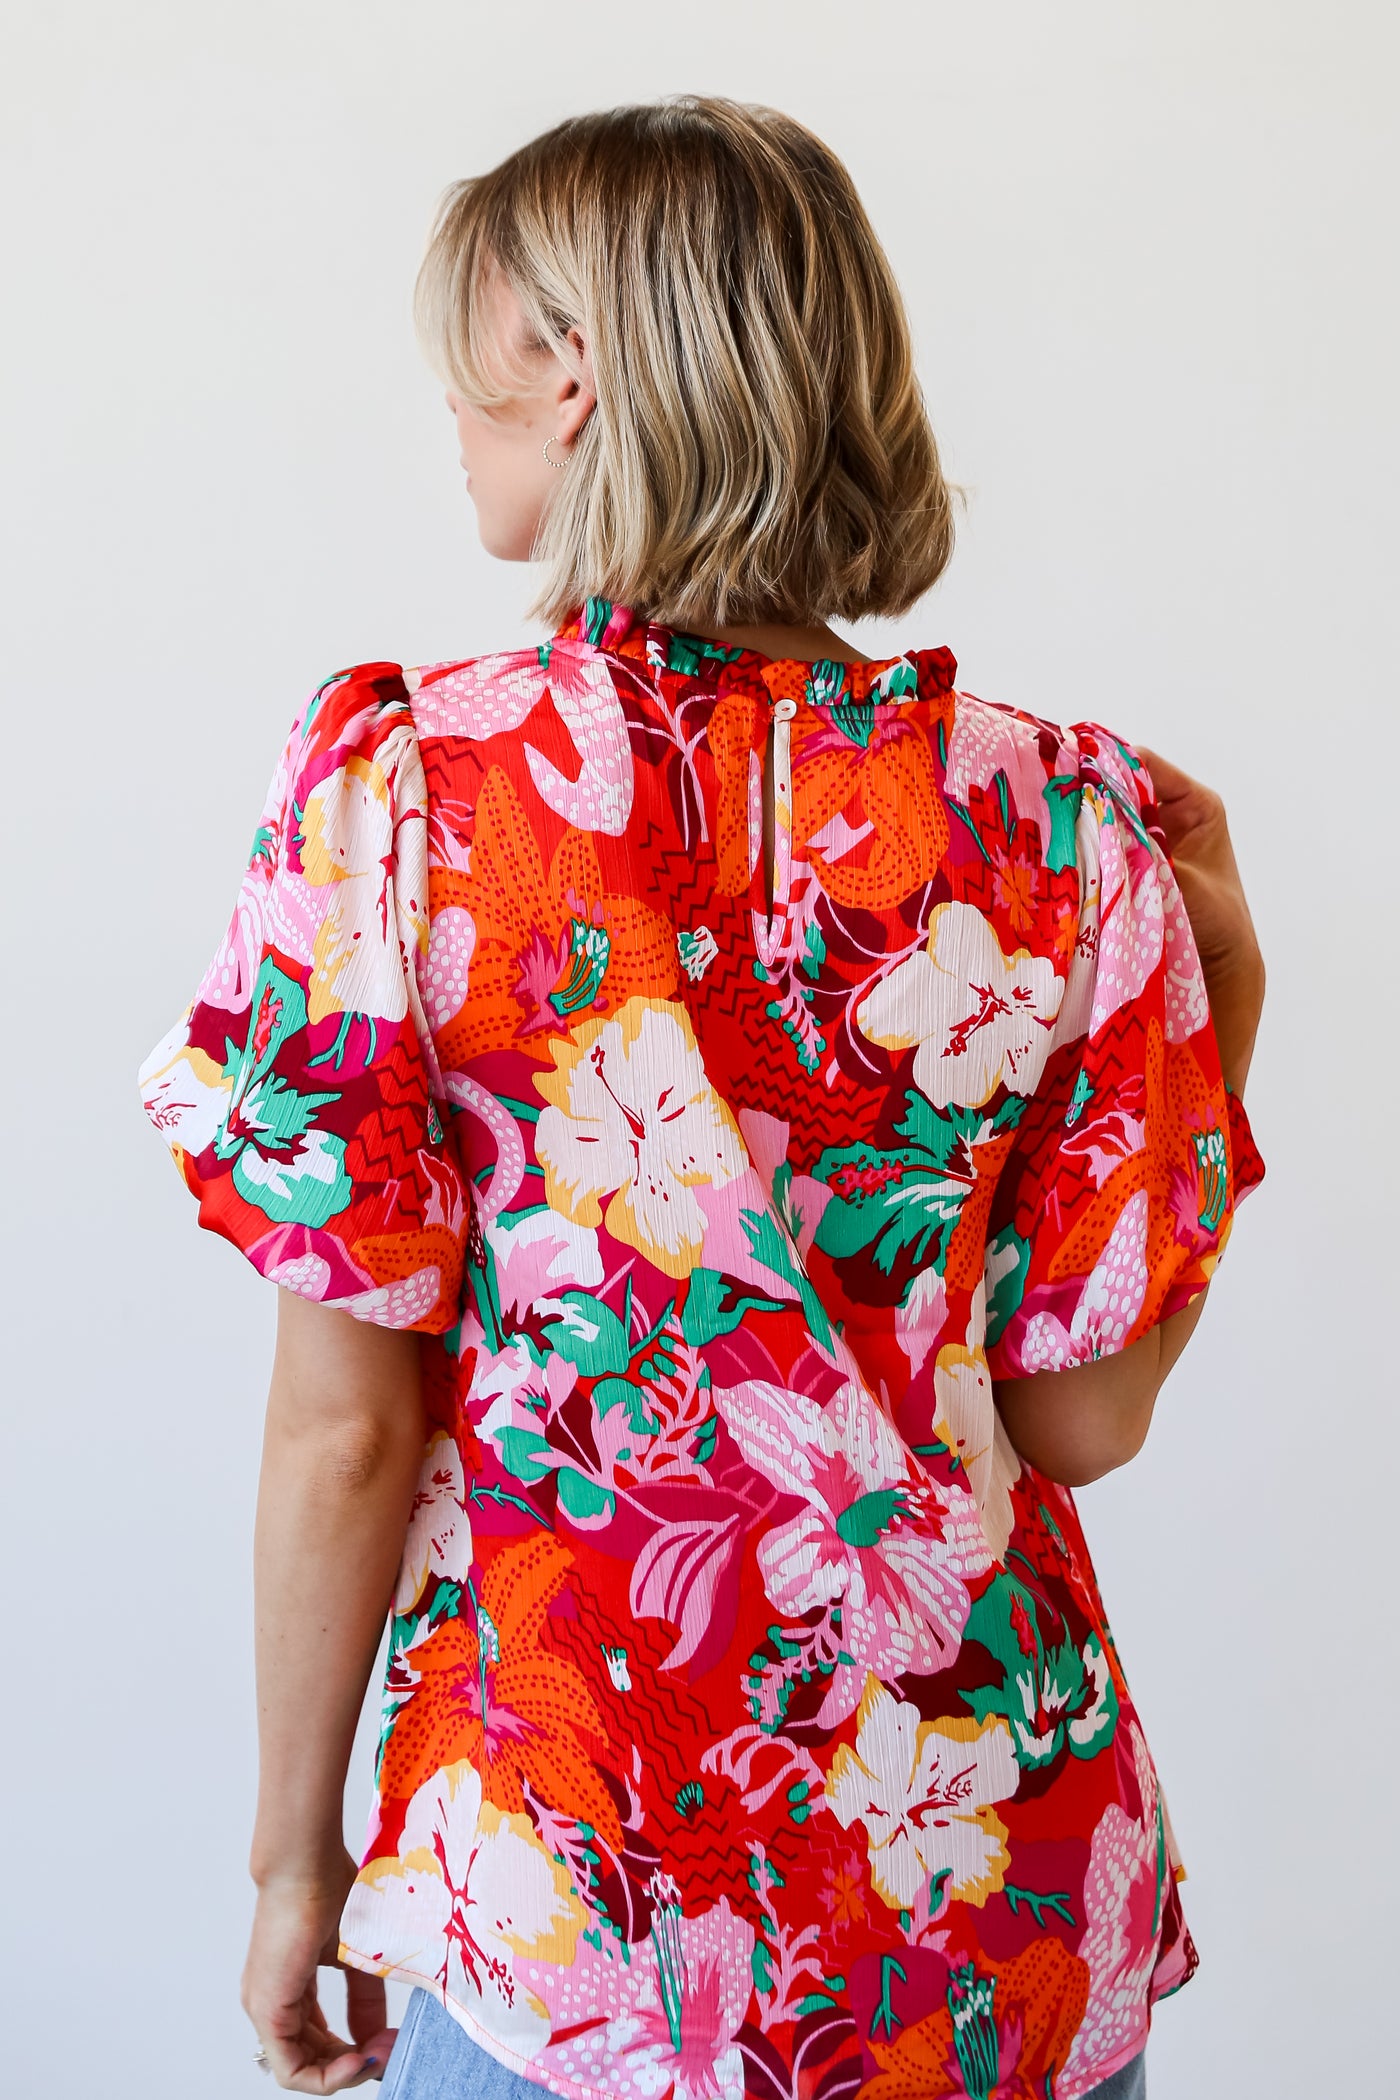 Fuchsia Floral Blouse for spring